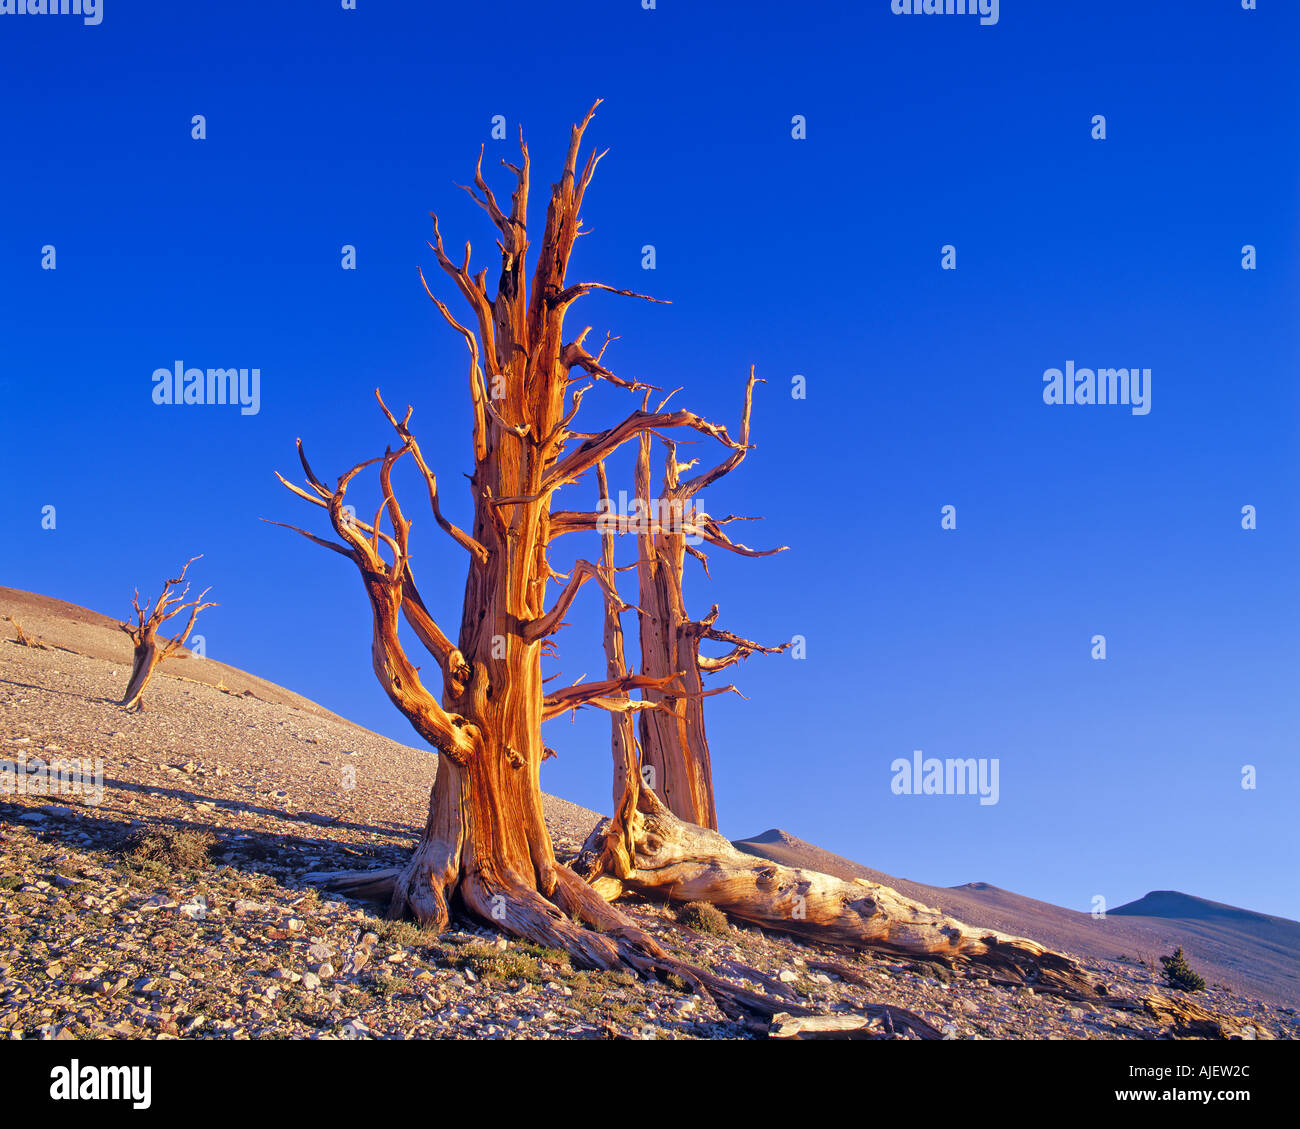 Bristlecone pine and White Mountains Ancient Bristlecone Pine Forest Patriarch Grove Inyo National Forest California USA Stock Photo